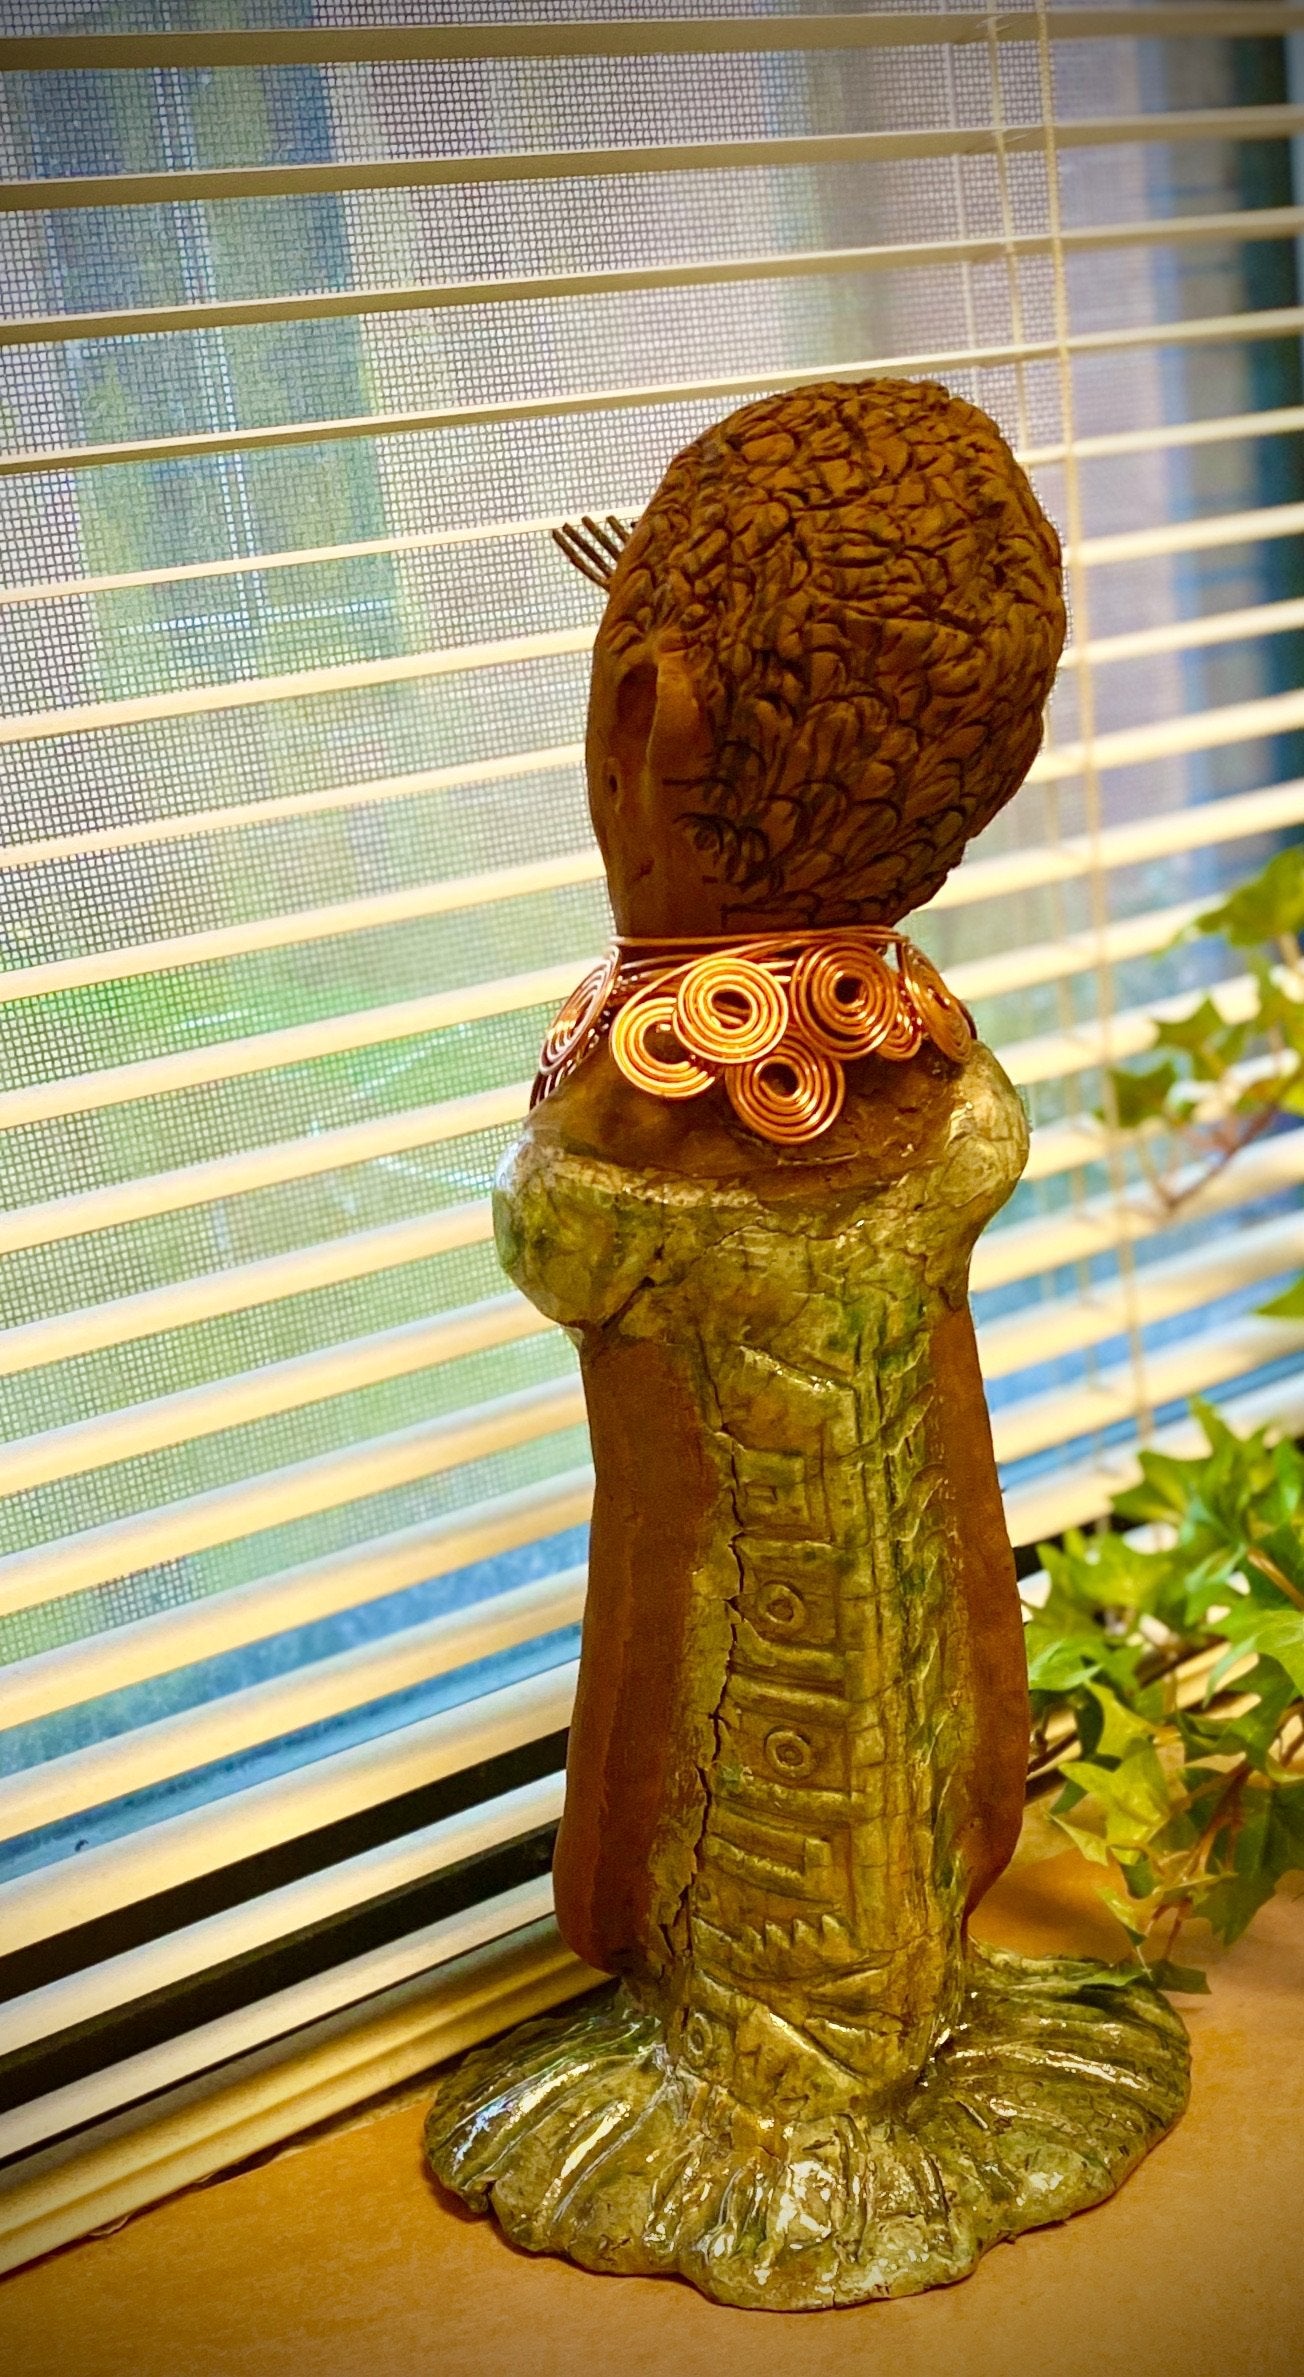 Gabrielle  stands 14" x 6" x 5.5" and weighs 2.15 lbs. She has a lovely honey brown complexion with green eye shadow. Her hairstyle is etched in clay with tribal markings.  Gabrielle  long loving arms rest beside her alligator green dress. She wears a spiral copper necklace. Gabrielle  is a sophisticated lady that will grace your home.